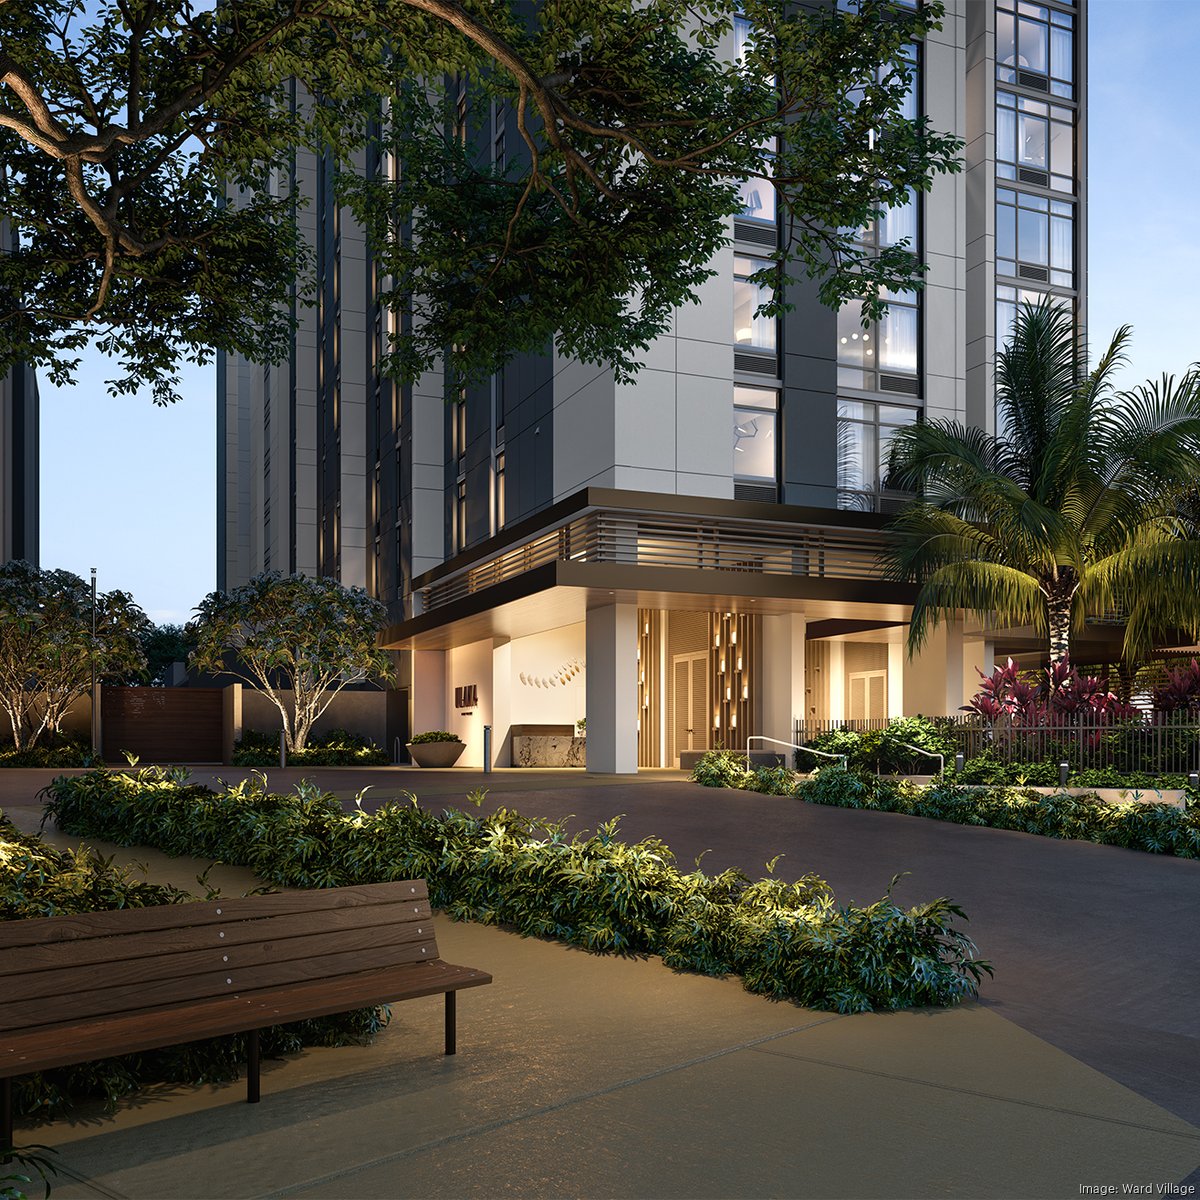 WARD VILLAGE® WELCOMES RESIDENTS TO KŌʻULA® WITH OPENING OF NEW